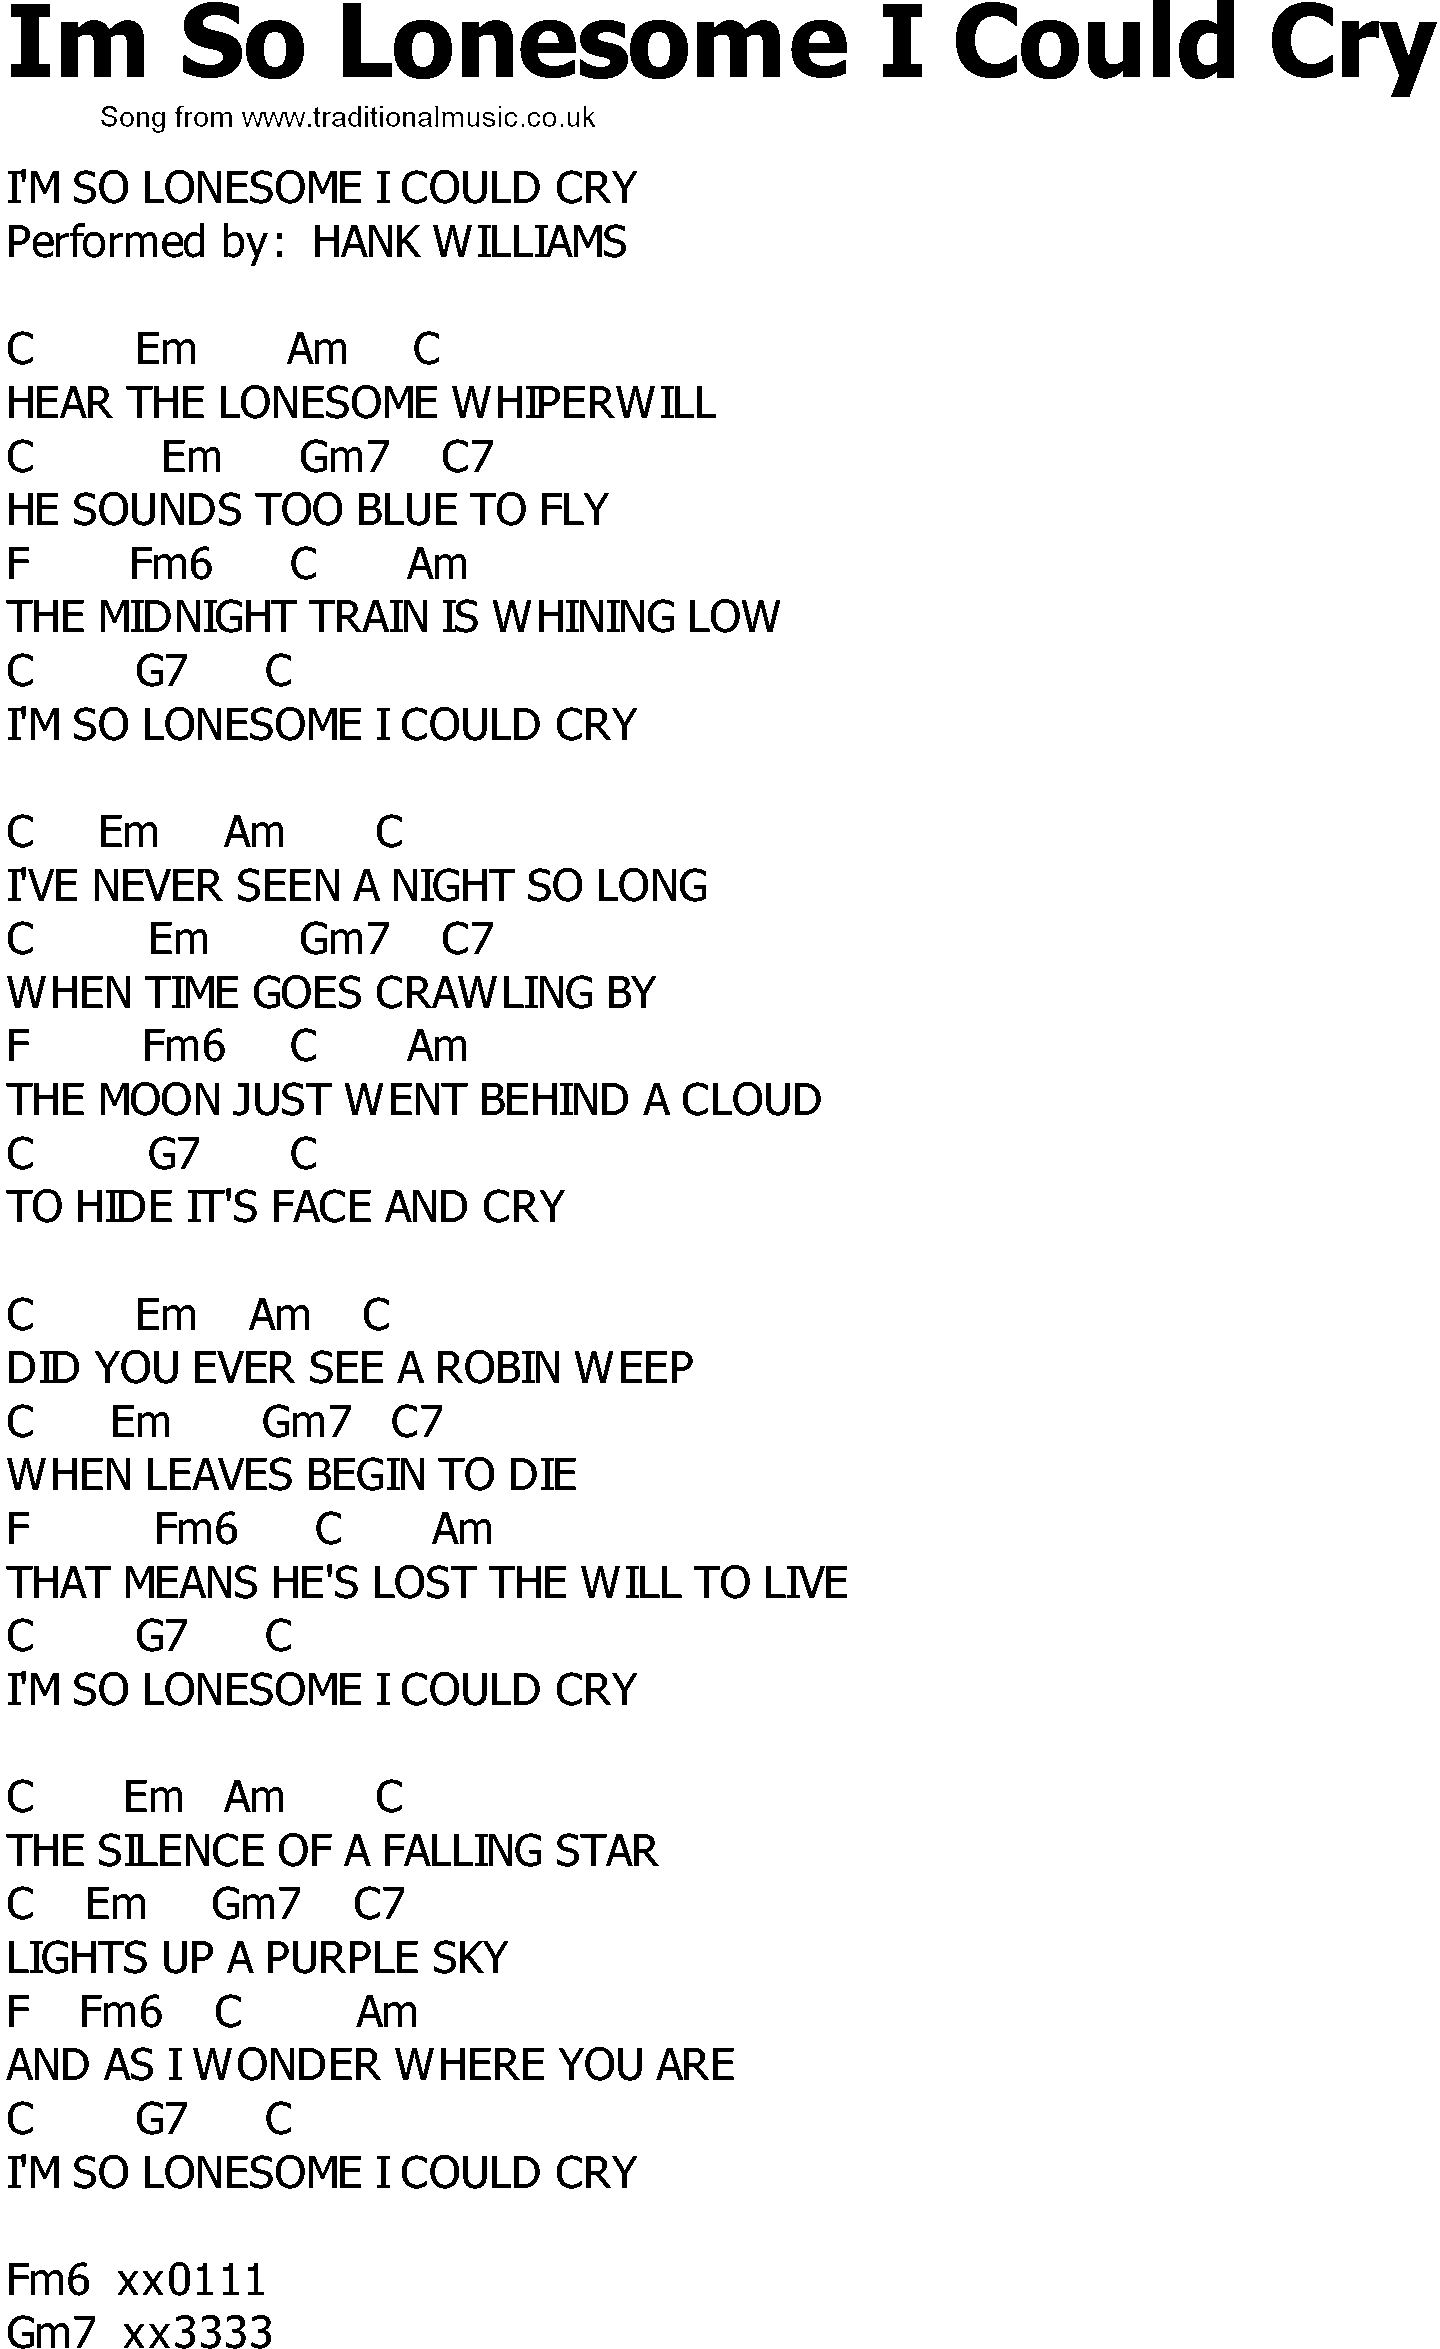 Old Country song lyrics with chords - Im So Lonesome I Could Cry